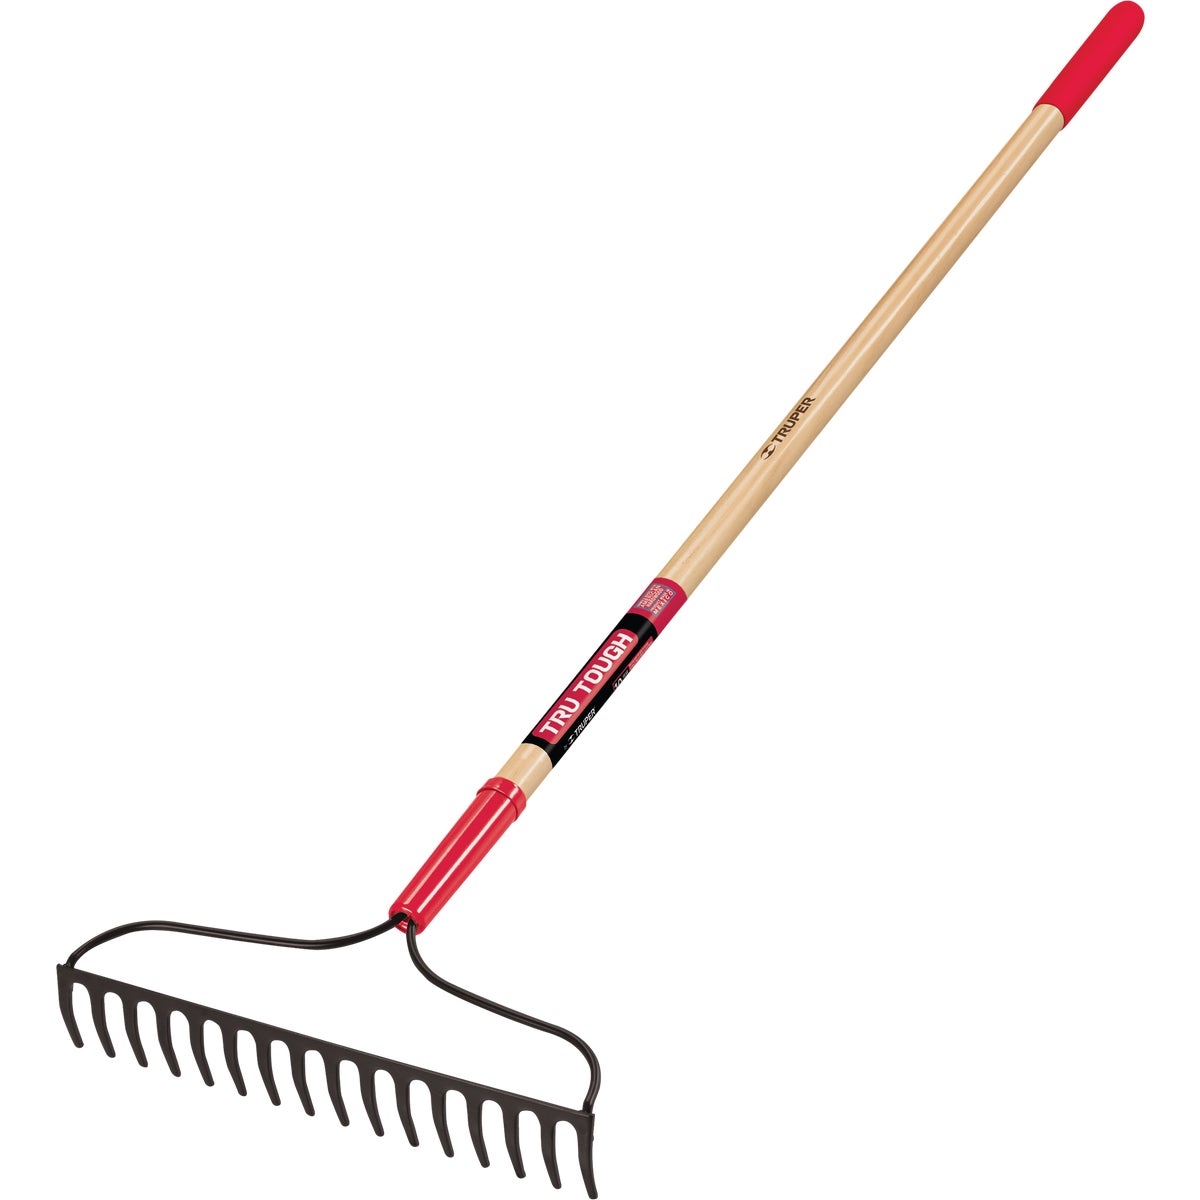 Item 701430, Tru Tough welded bow rake is designed to loosen and level soil.